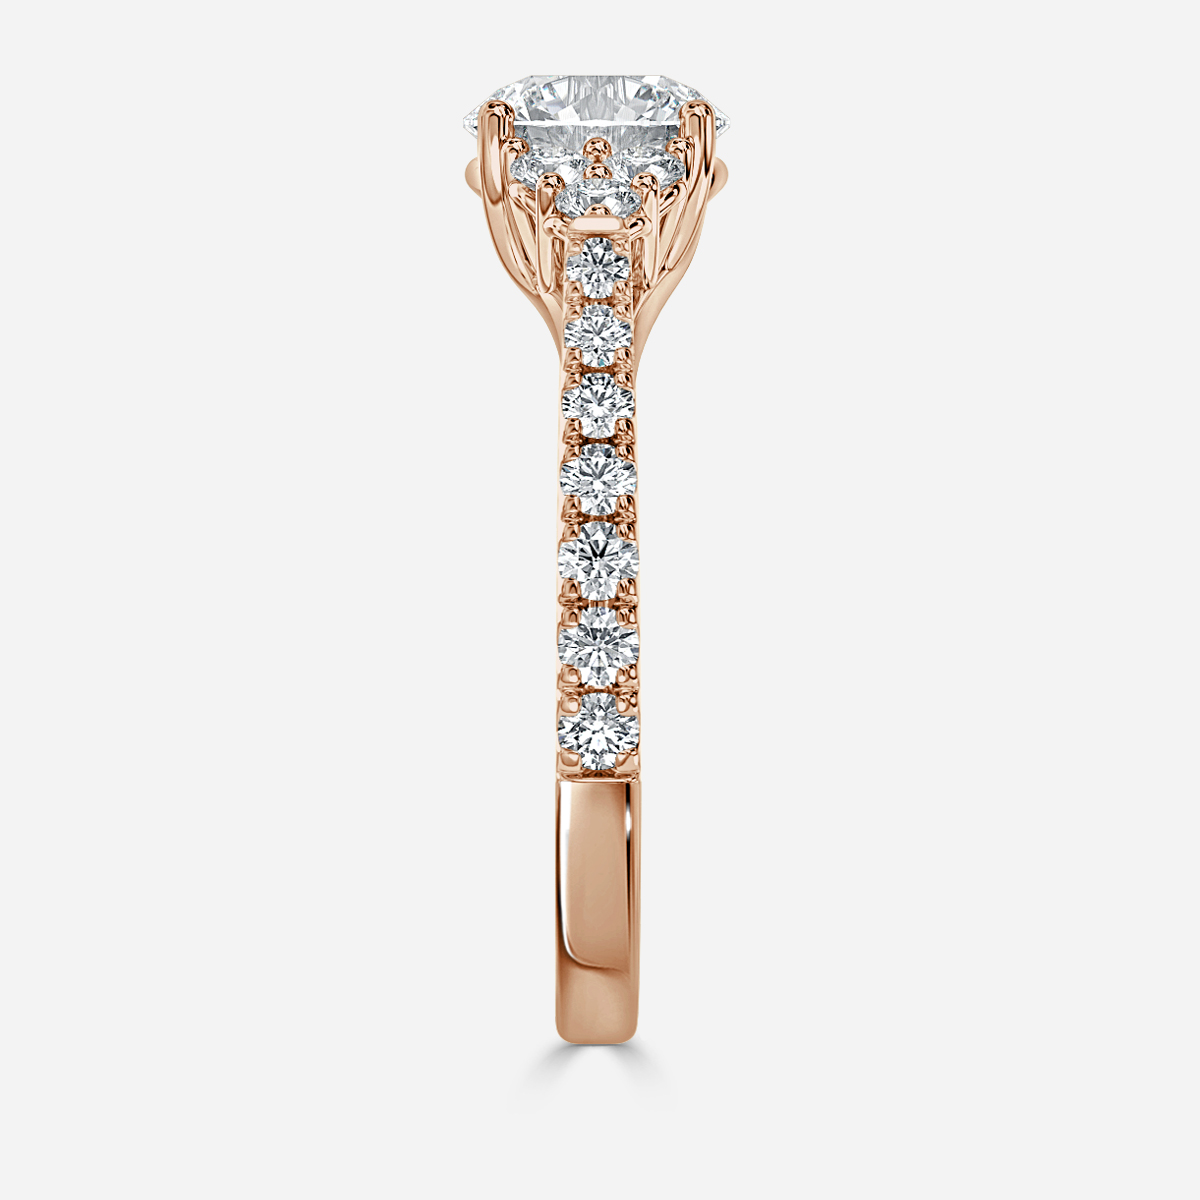 Mithrial Rose Gold Trilogy Engagement Ring